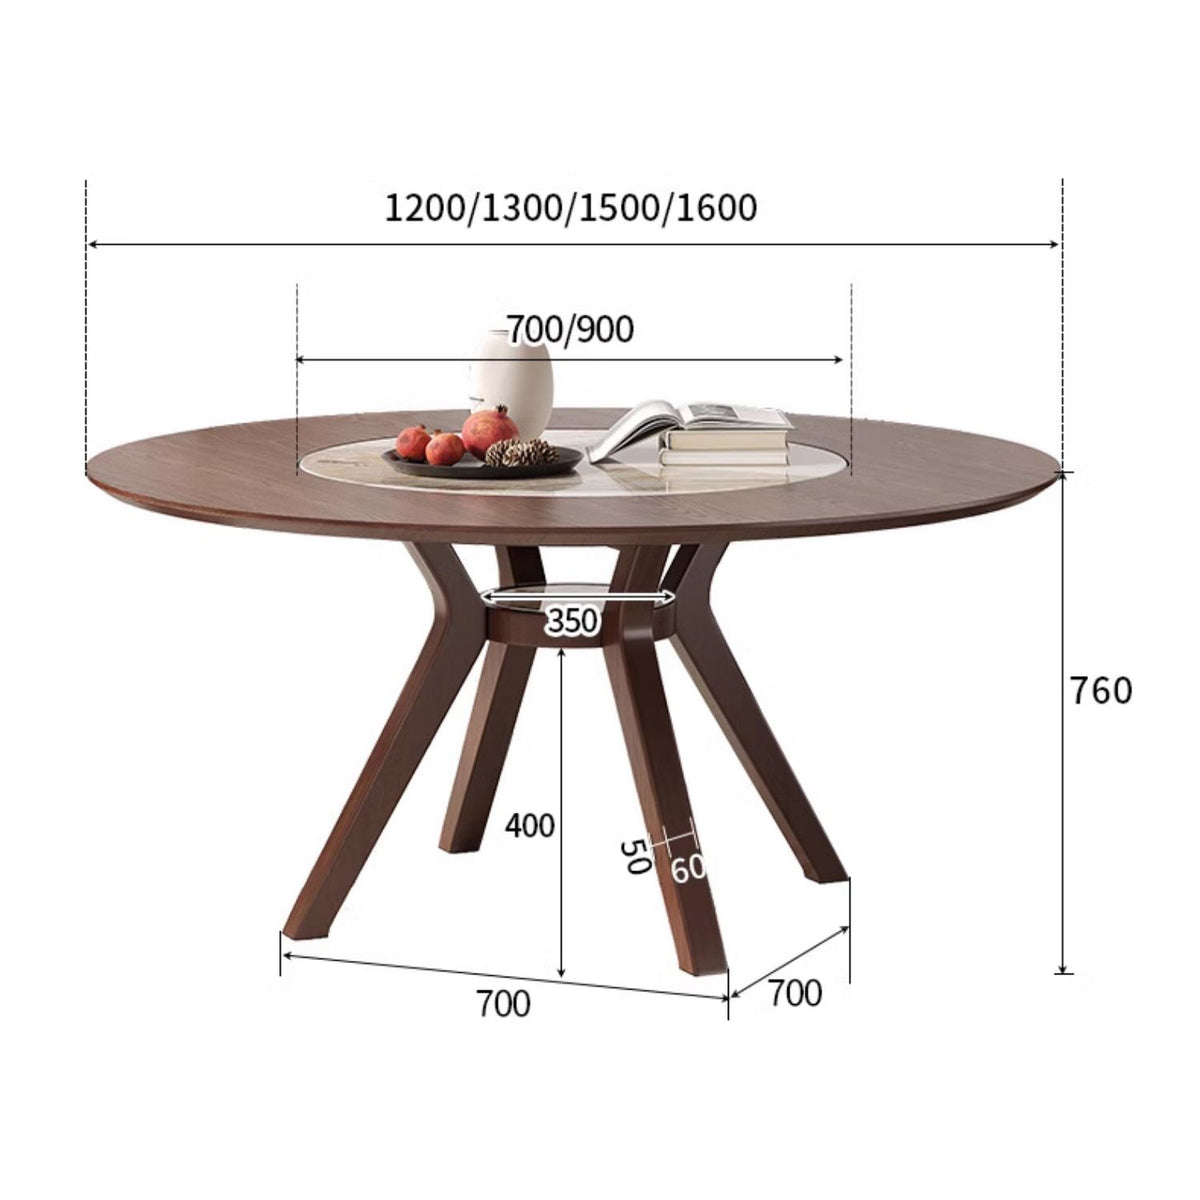 Elegant Glossy White Sintered Stone Table with Premium Ash Wood Base fmbs-005